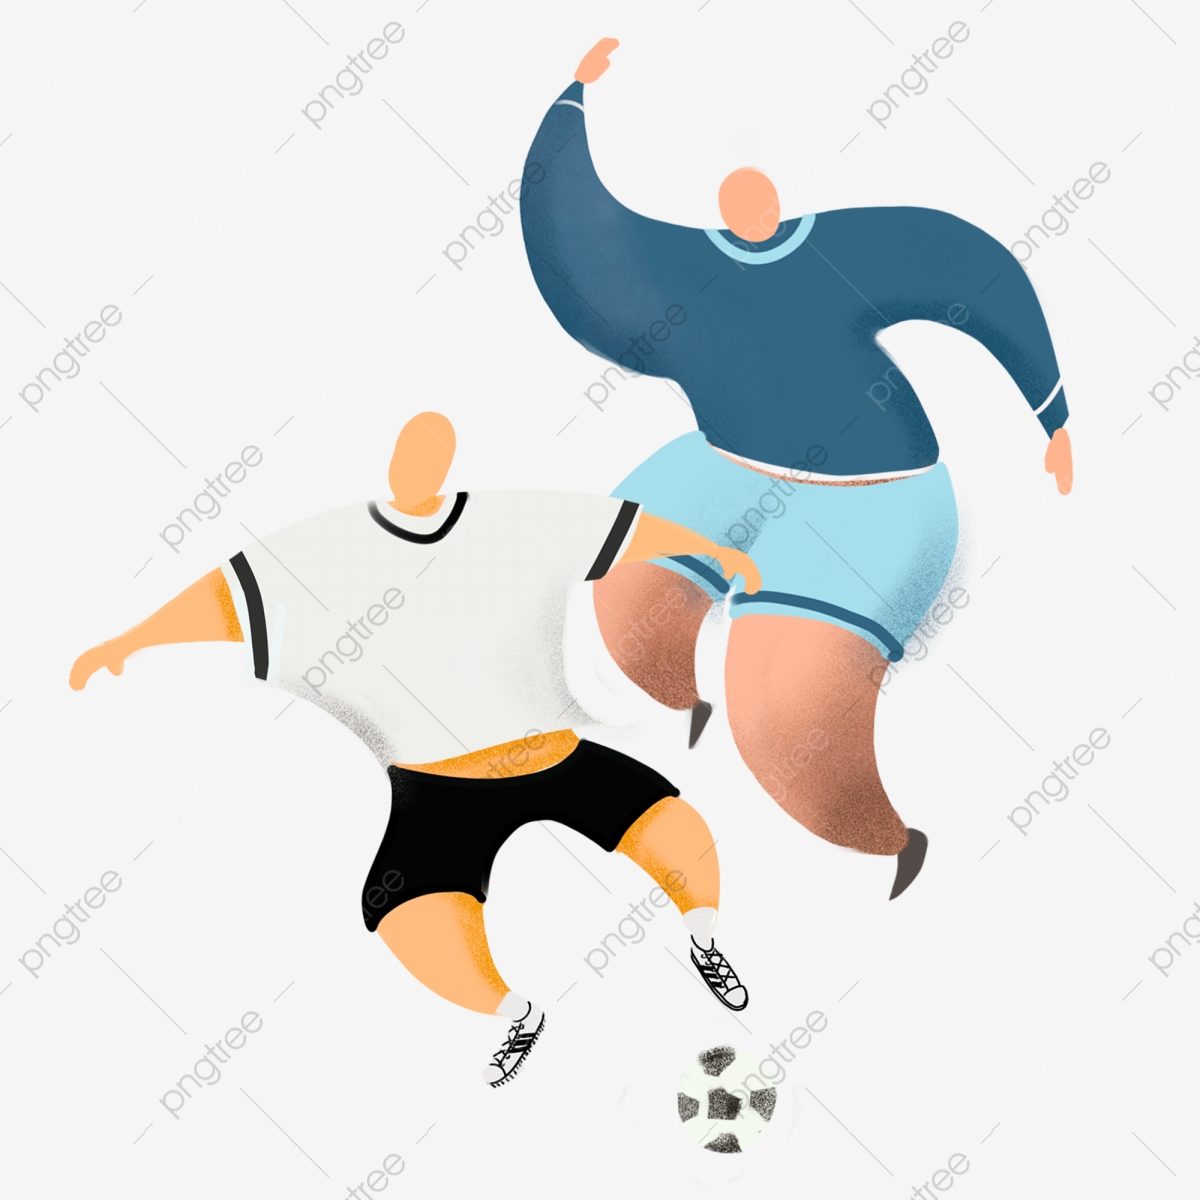 athlete clipart abstract